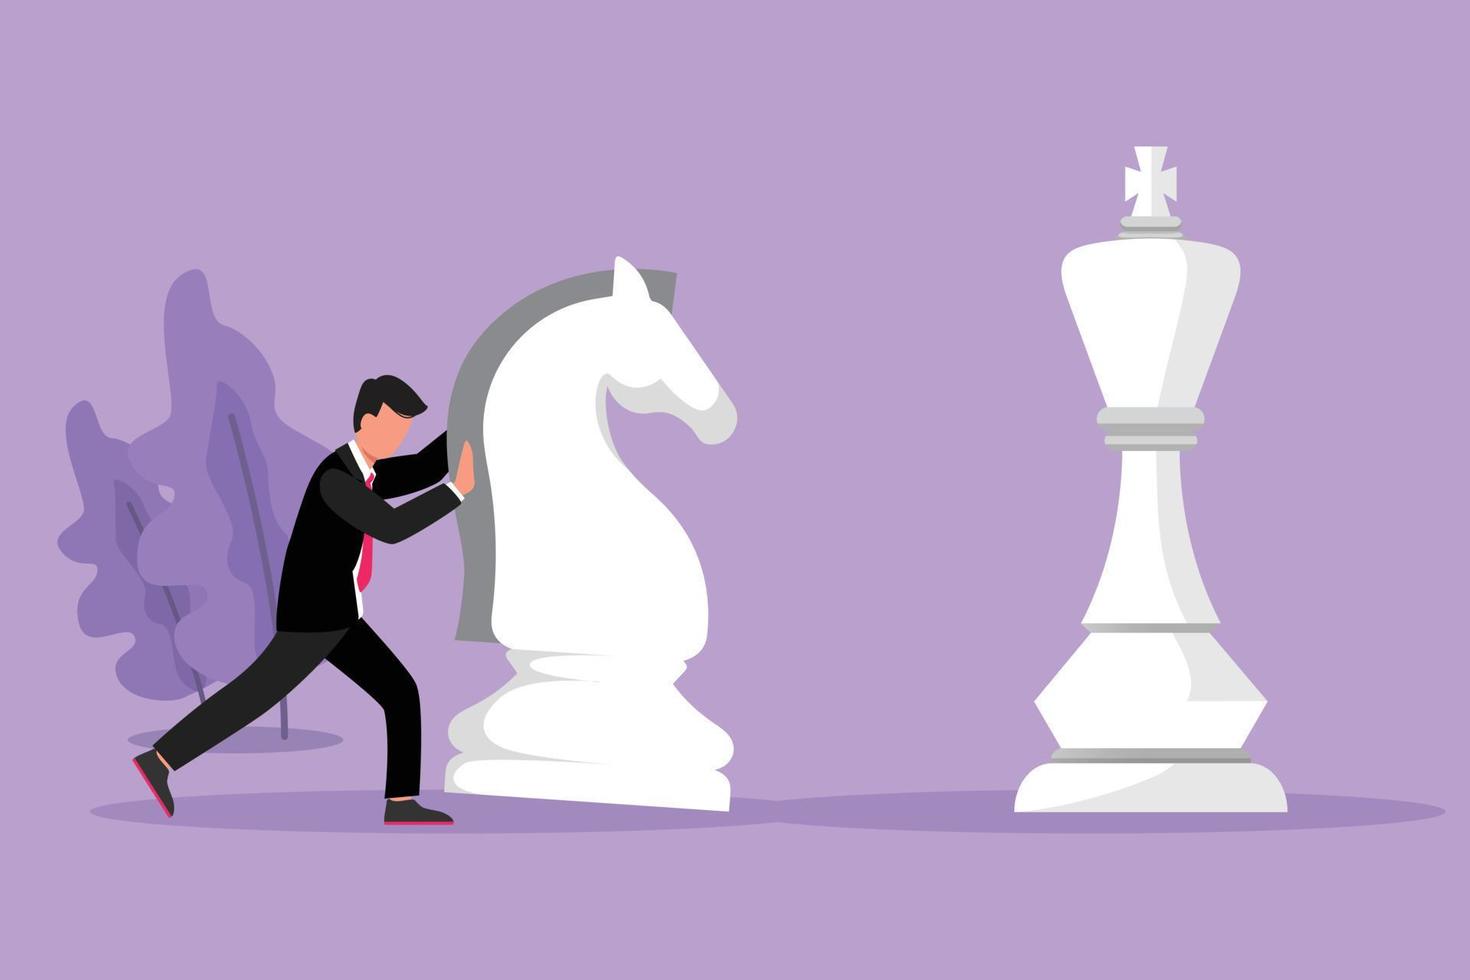 Cartoon flat style drawing competitive businessman push huge knight chess piece to beat king. Business strategy, marketing plan. Strategic move in business concept. Graphic design vector illustration